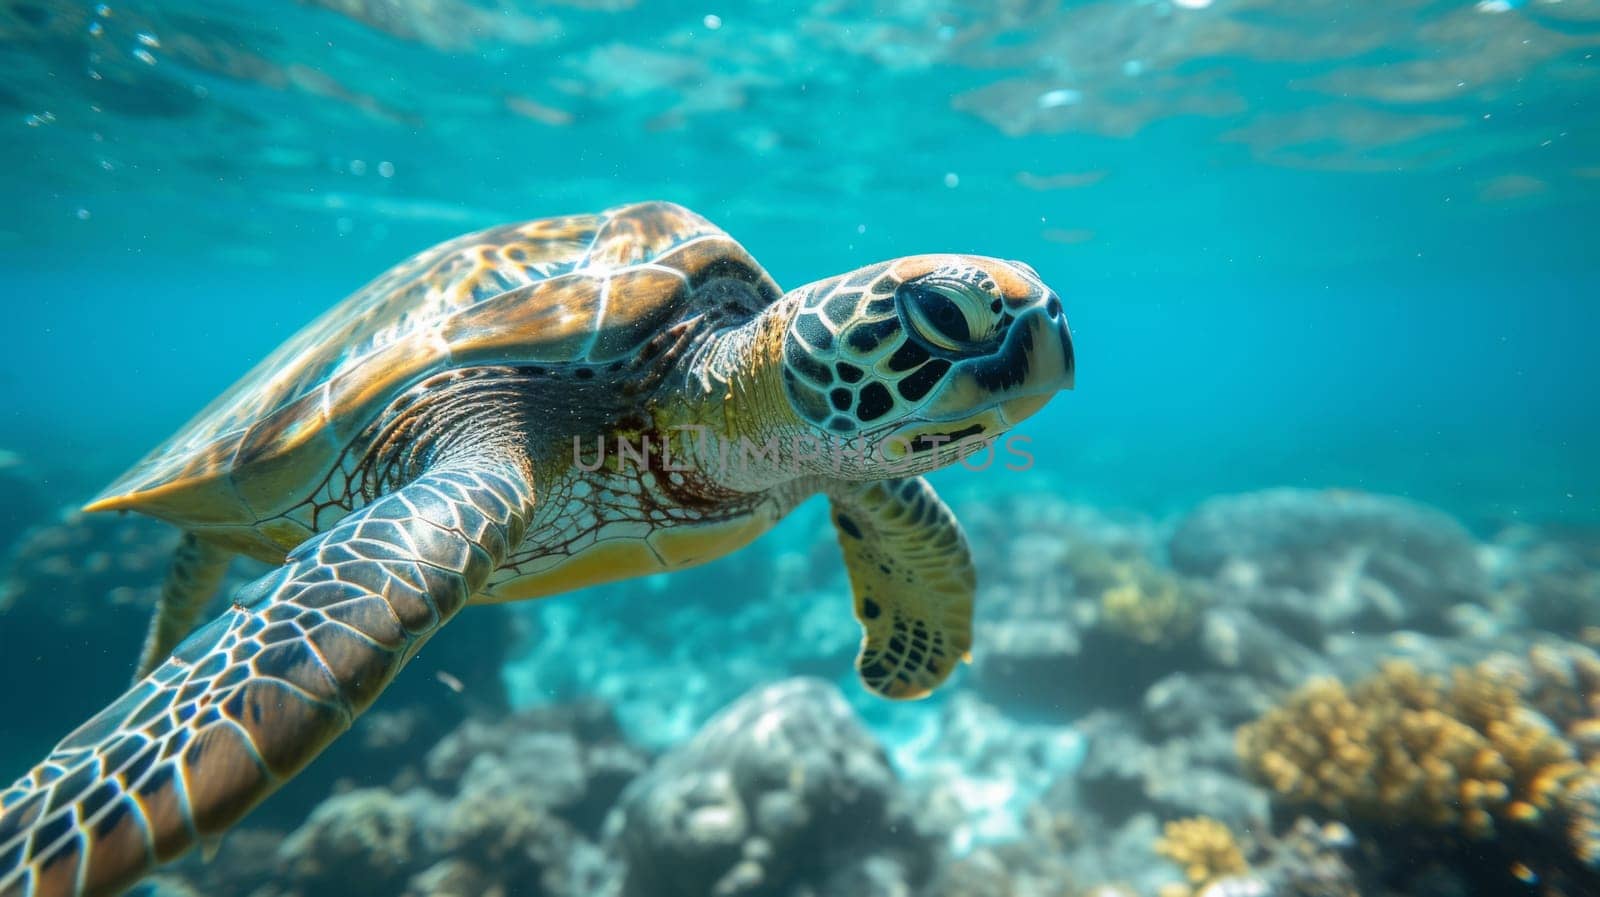 A turtle swimming in the ocean with a coral reef behind it